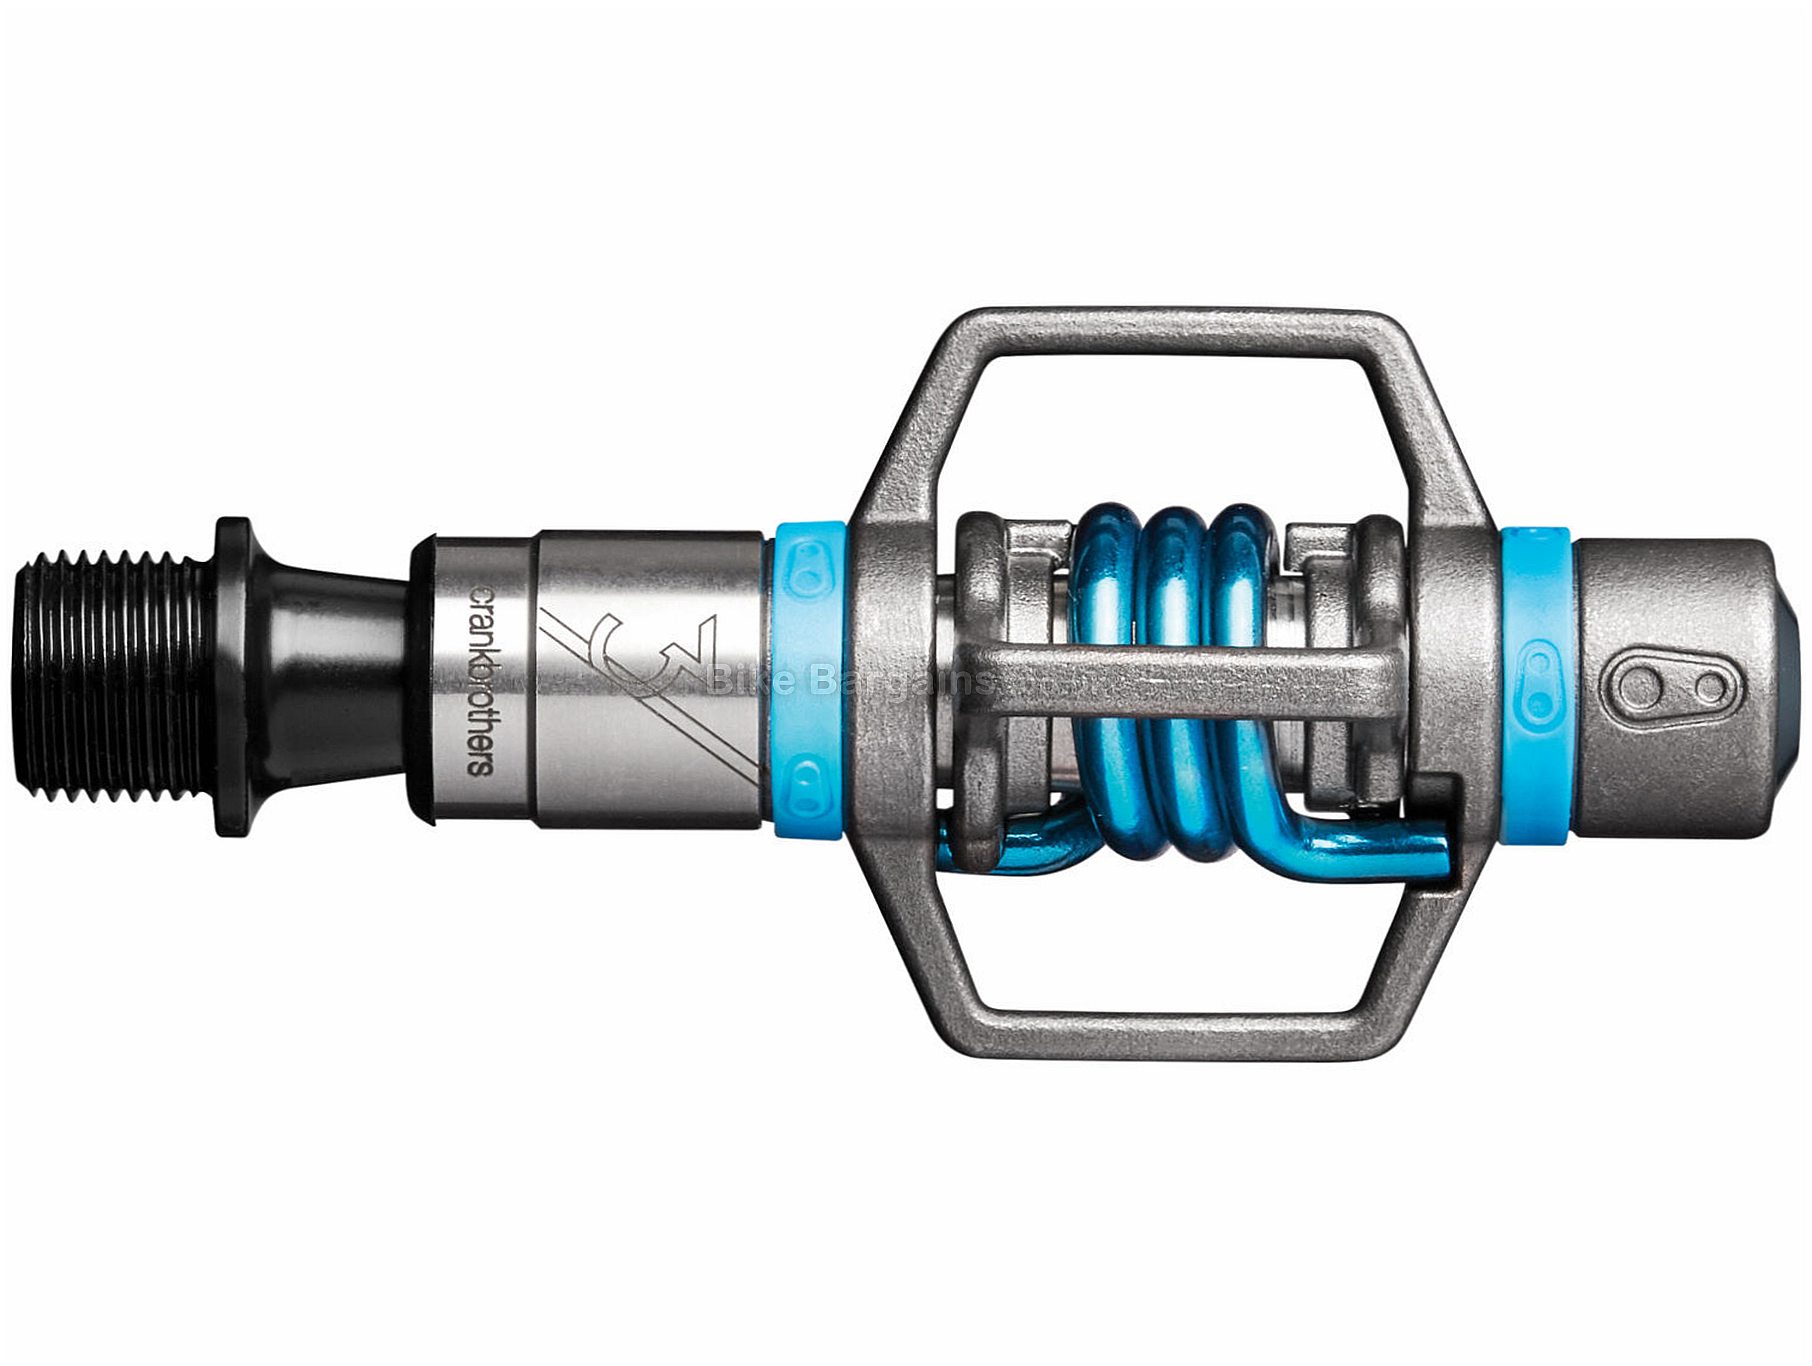 Eggbeater 3 – Crankbrothers